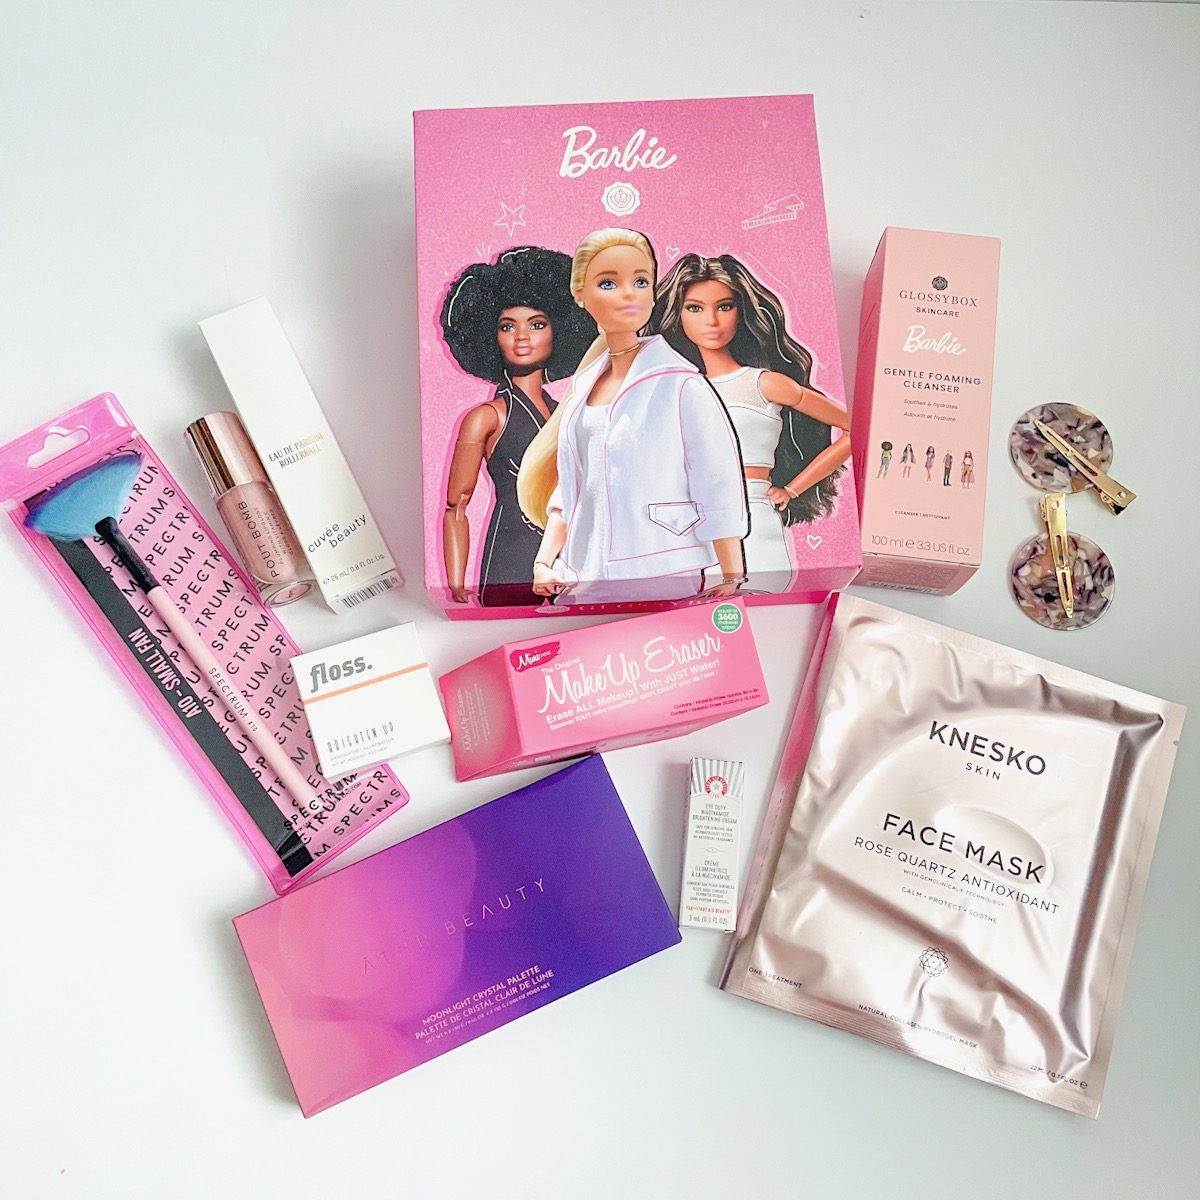 GlossyBox Limited Edition “Barbie x Glossybox” Review + Coupon